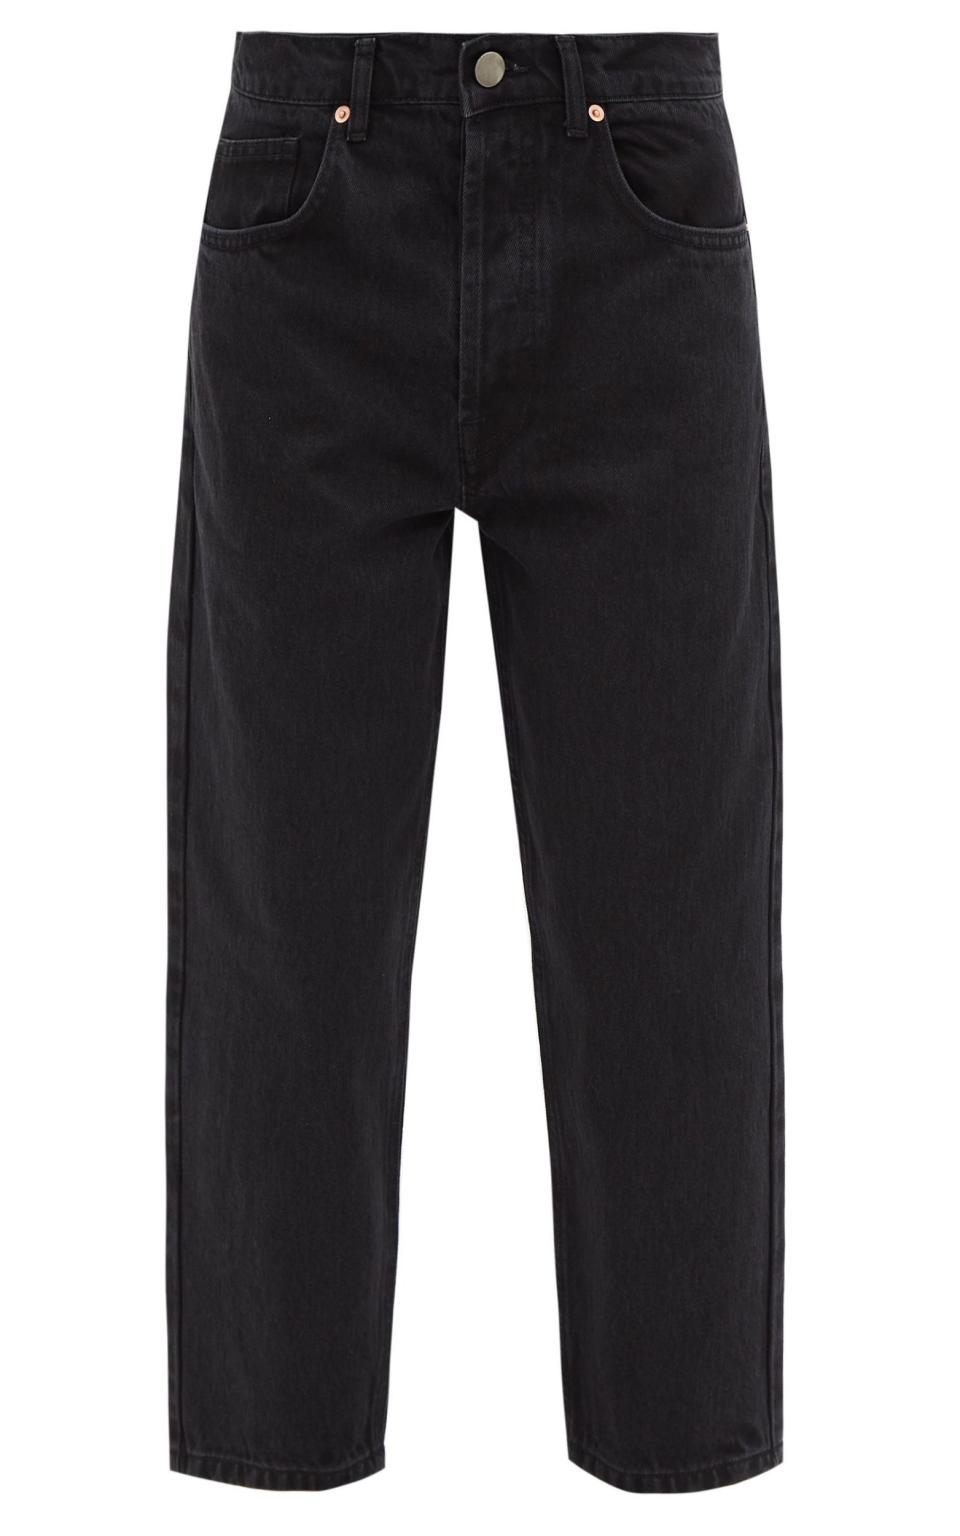 Raey tapered, cropped jeans, £160, Matches matchesfashion.com